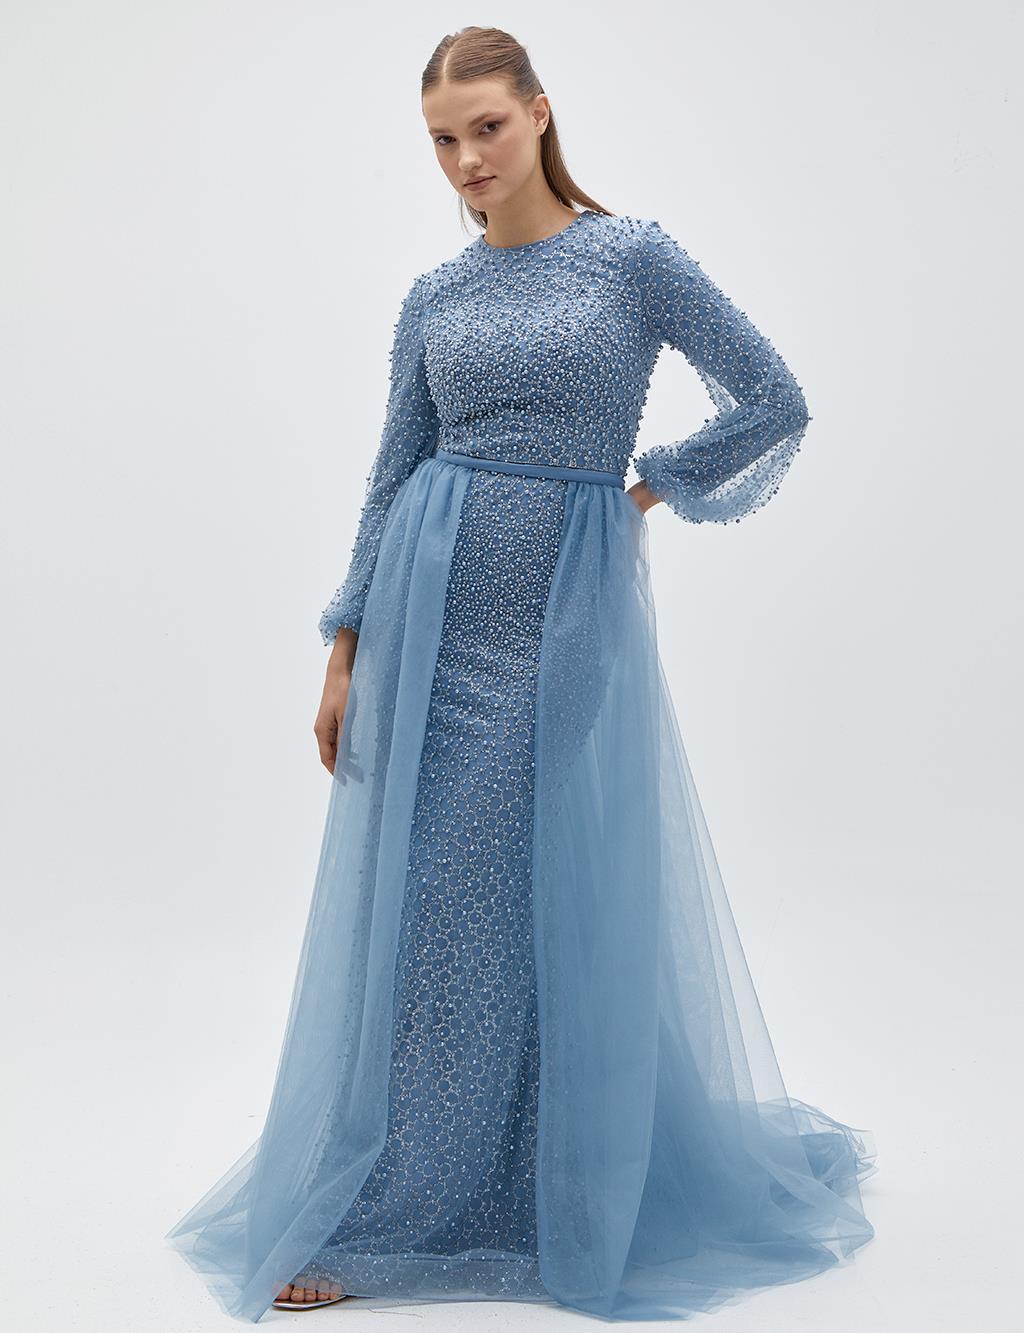 Pearl Embroidered Cape Evening Dress Granite Blue